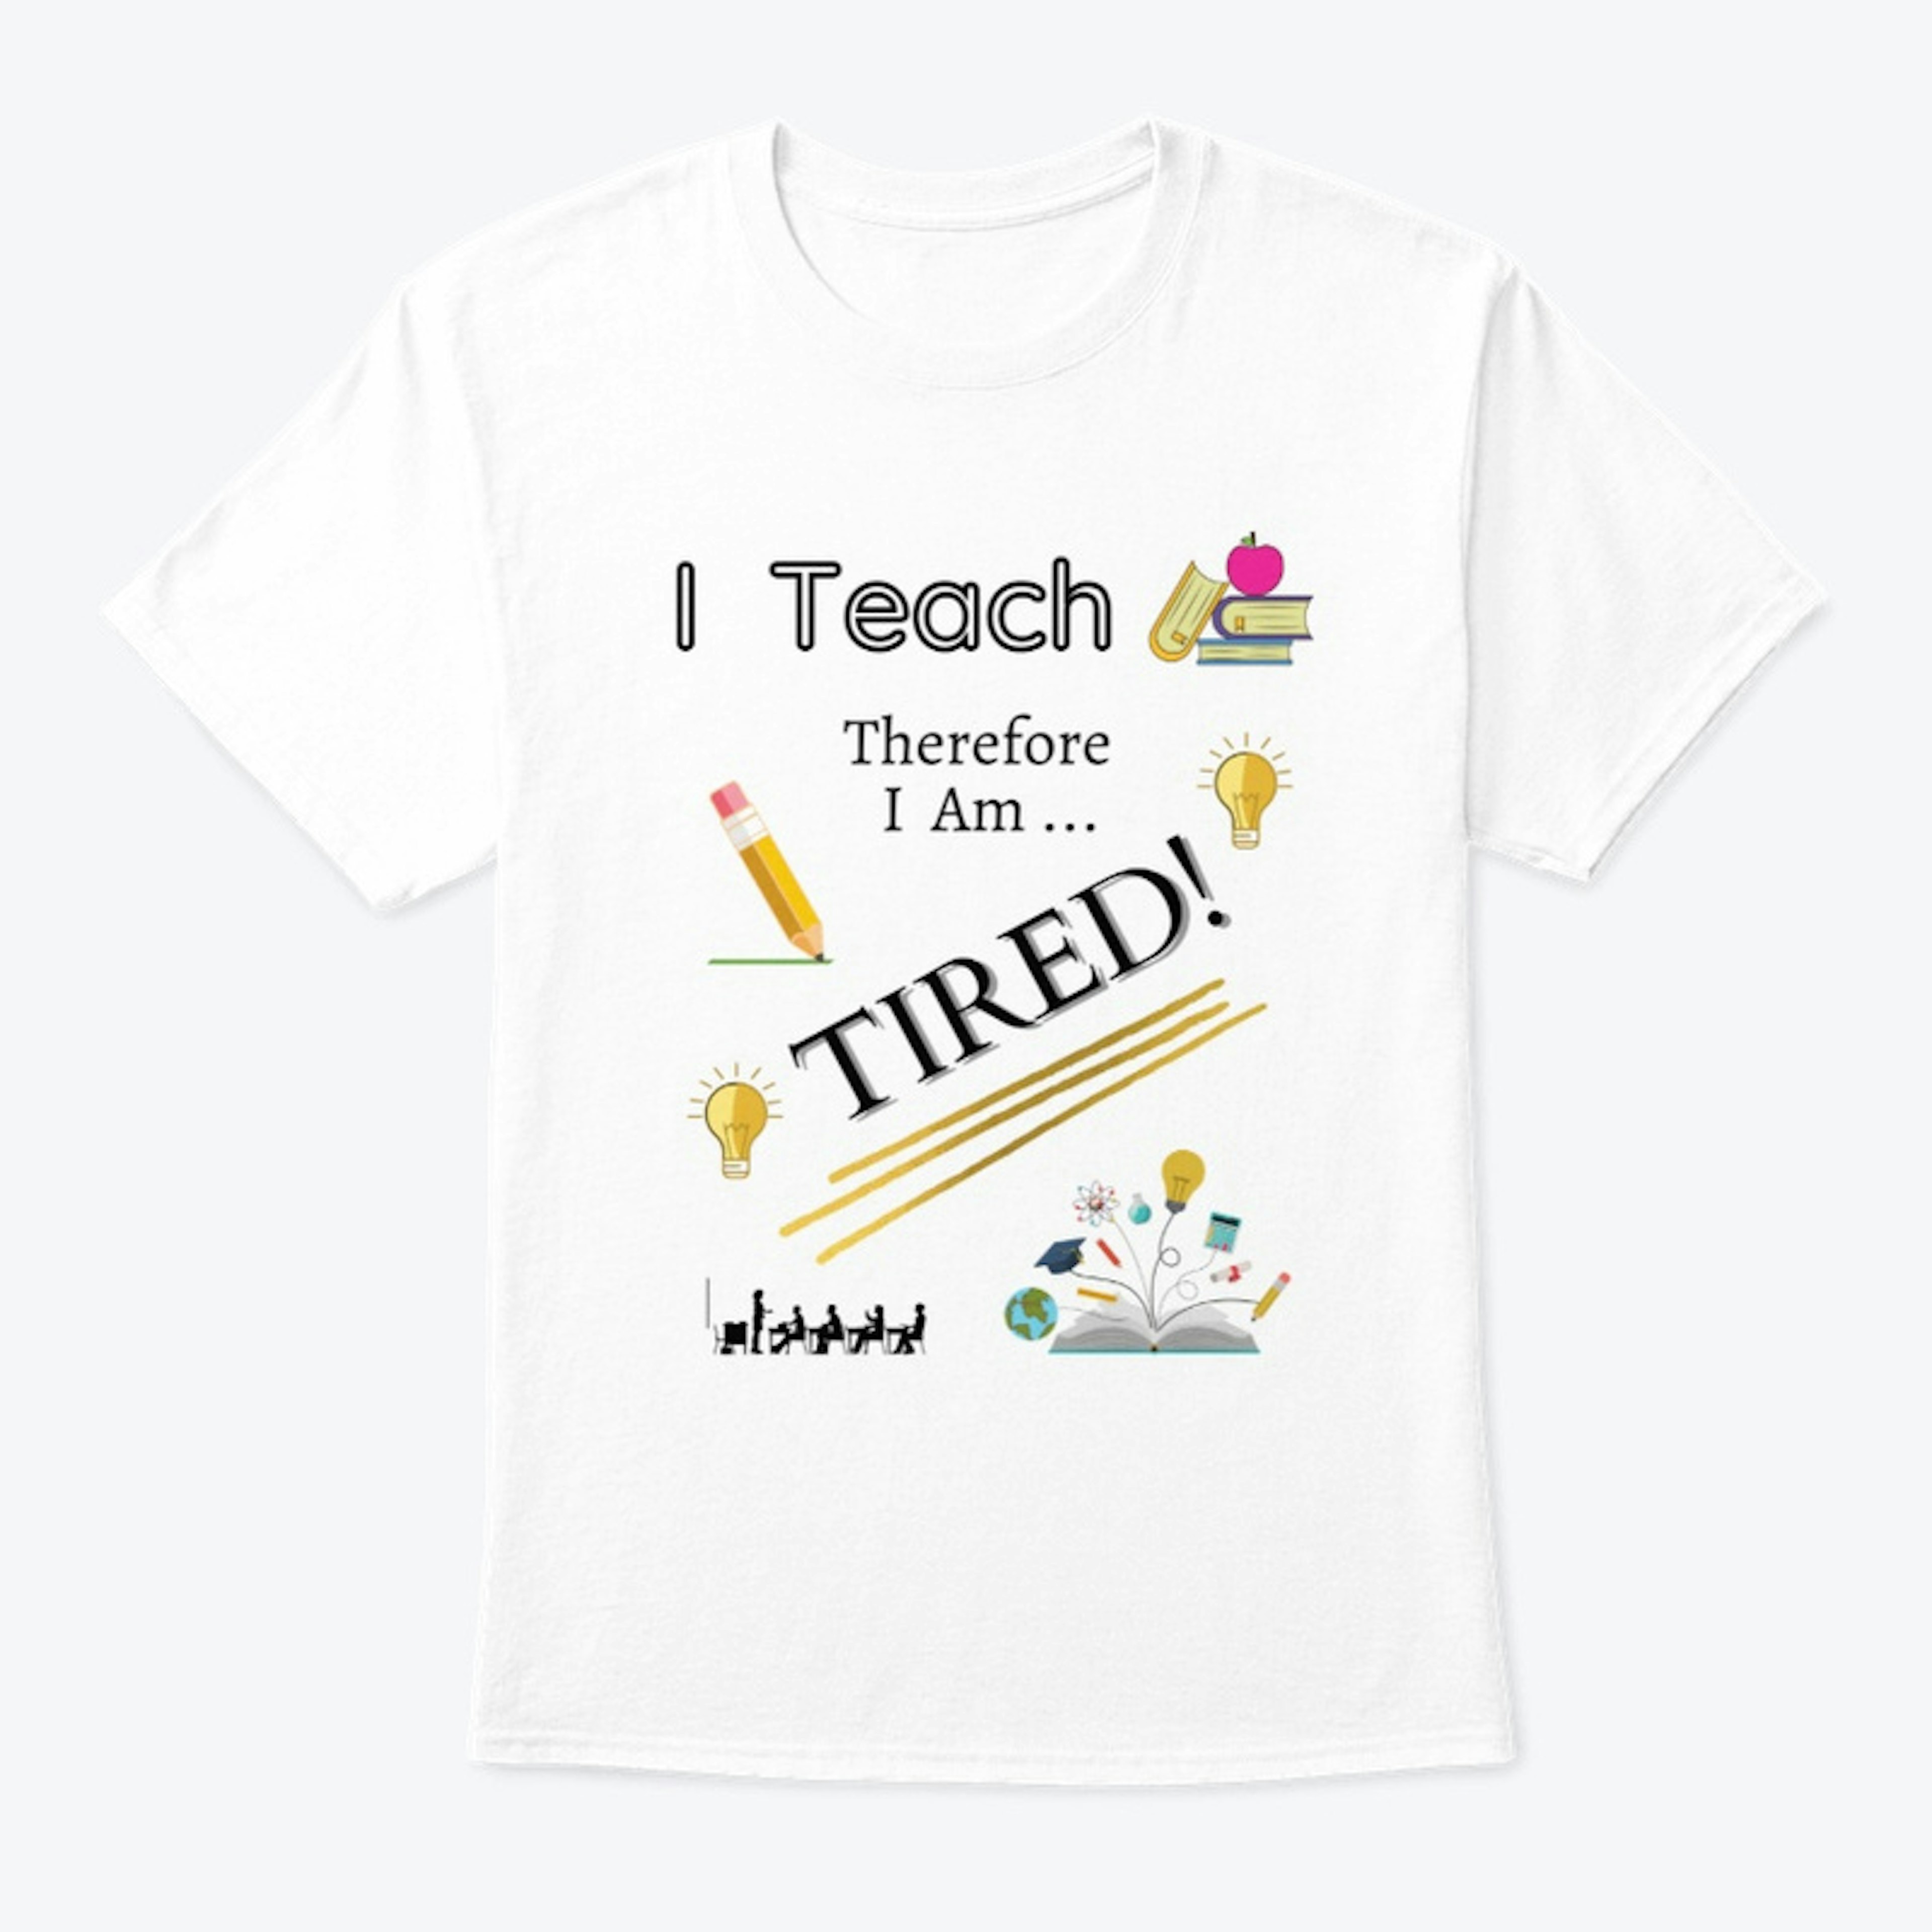 I Teach Therefore I Am Tired!